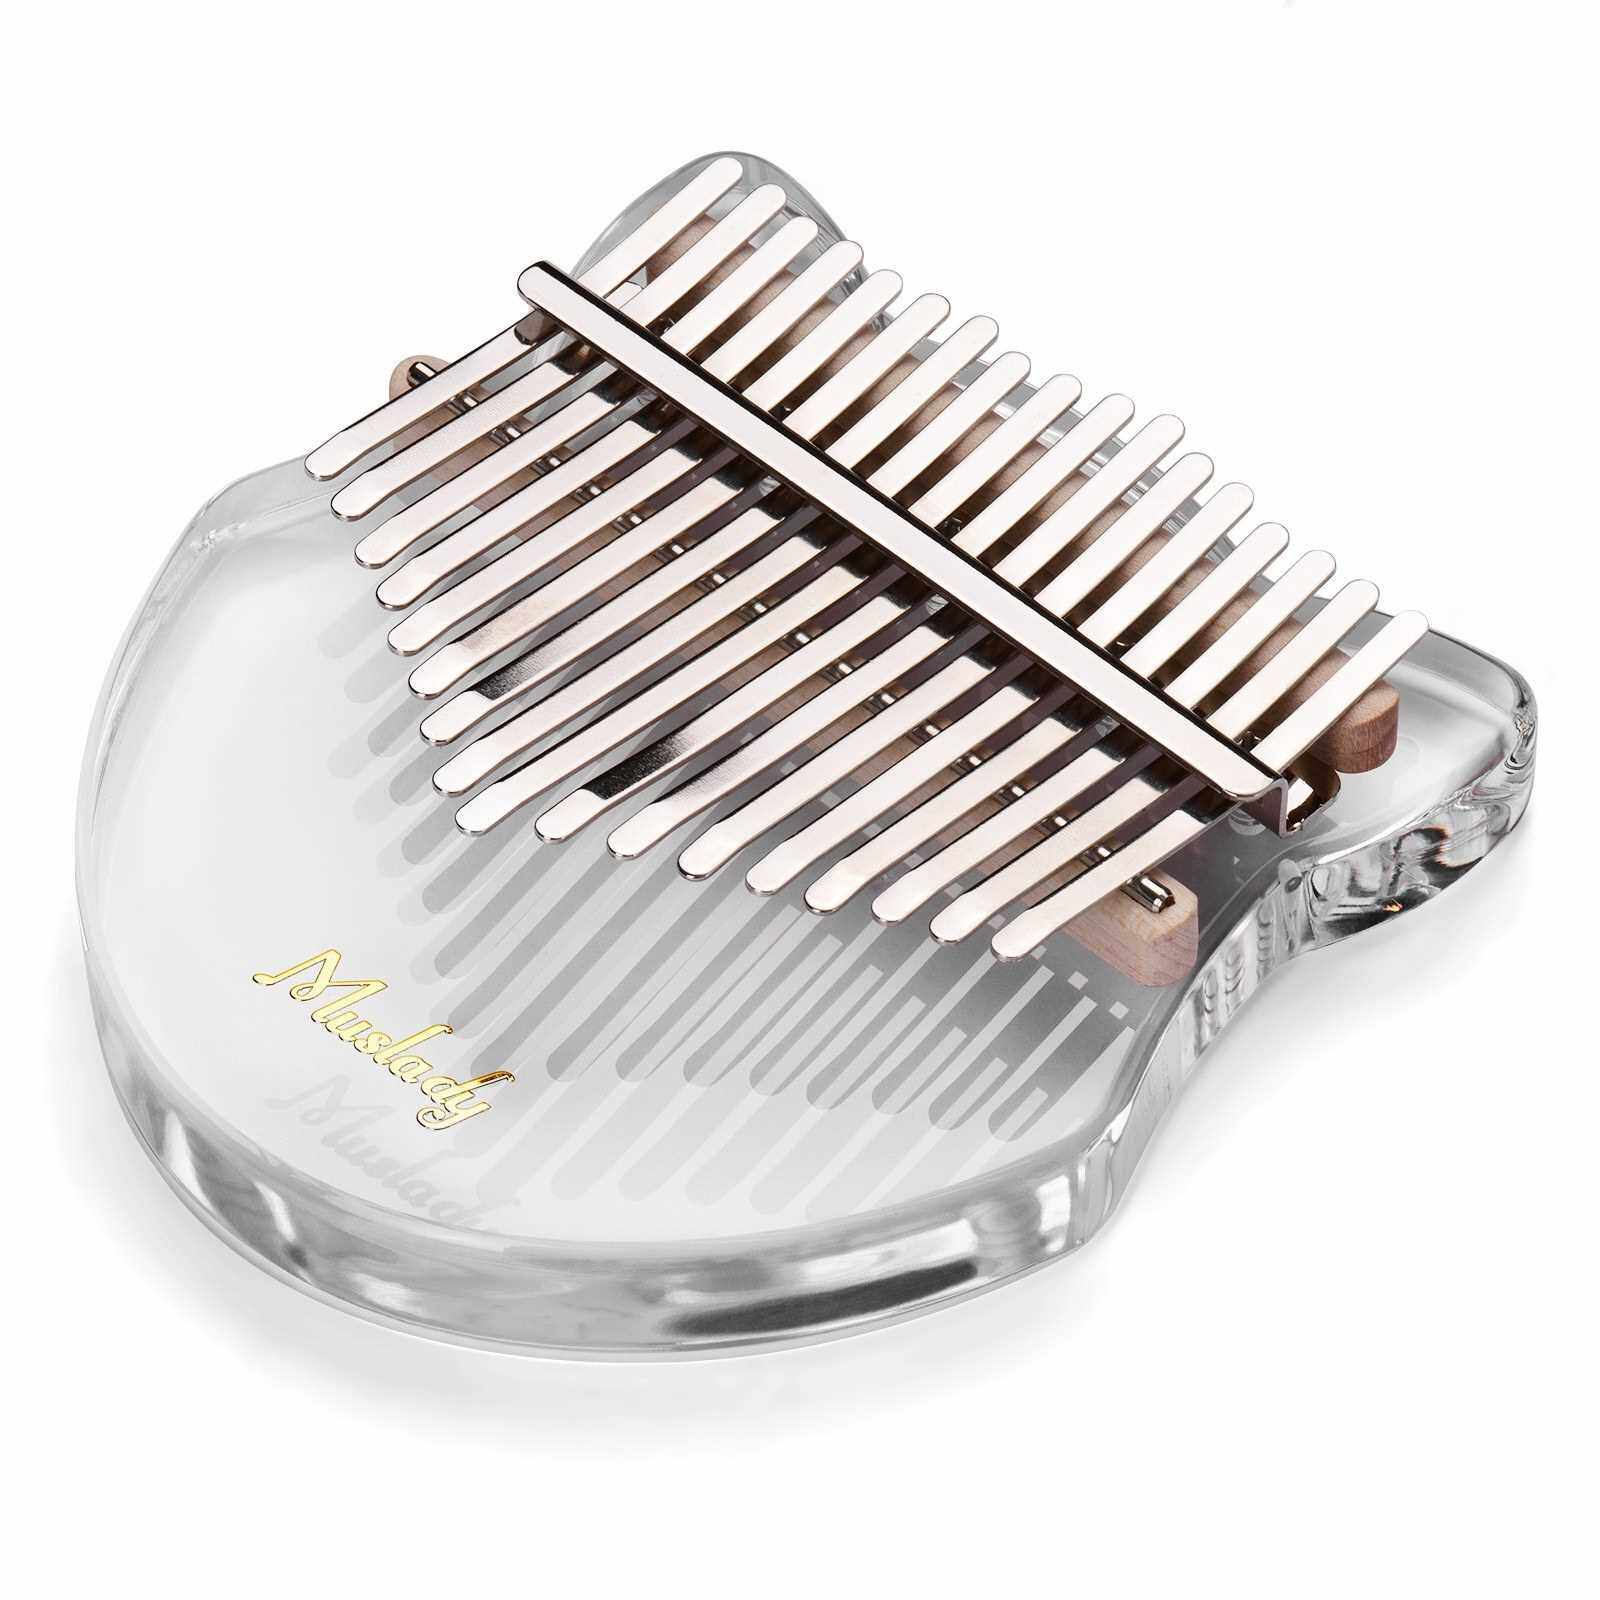 Muslady Cute Fox-shaped 17-Key Kalimba Thumb Piano Acrylic Material with Carry Bag Musical Note Stickers Tuning Hammer Cleaning Cloth Music Book, Transparent (Transparent)